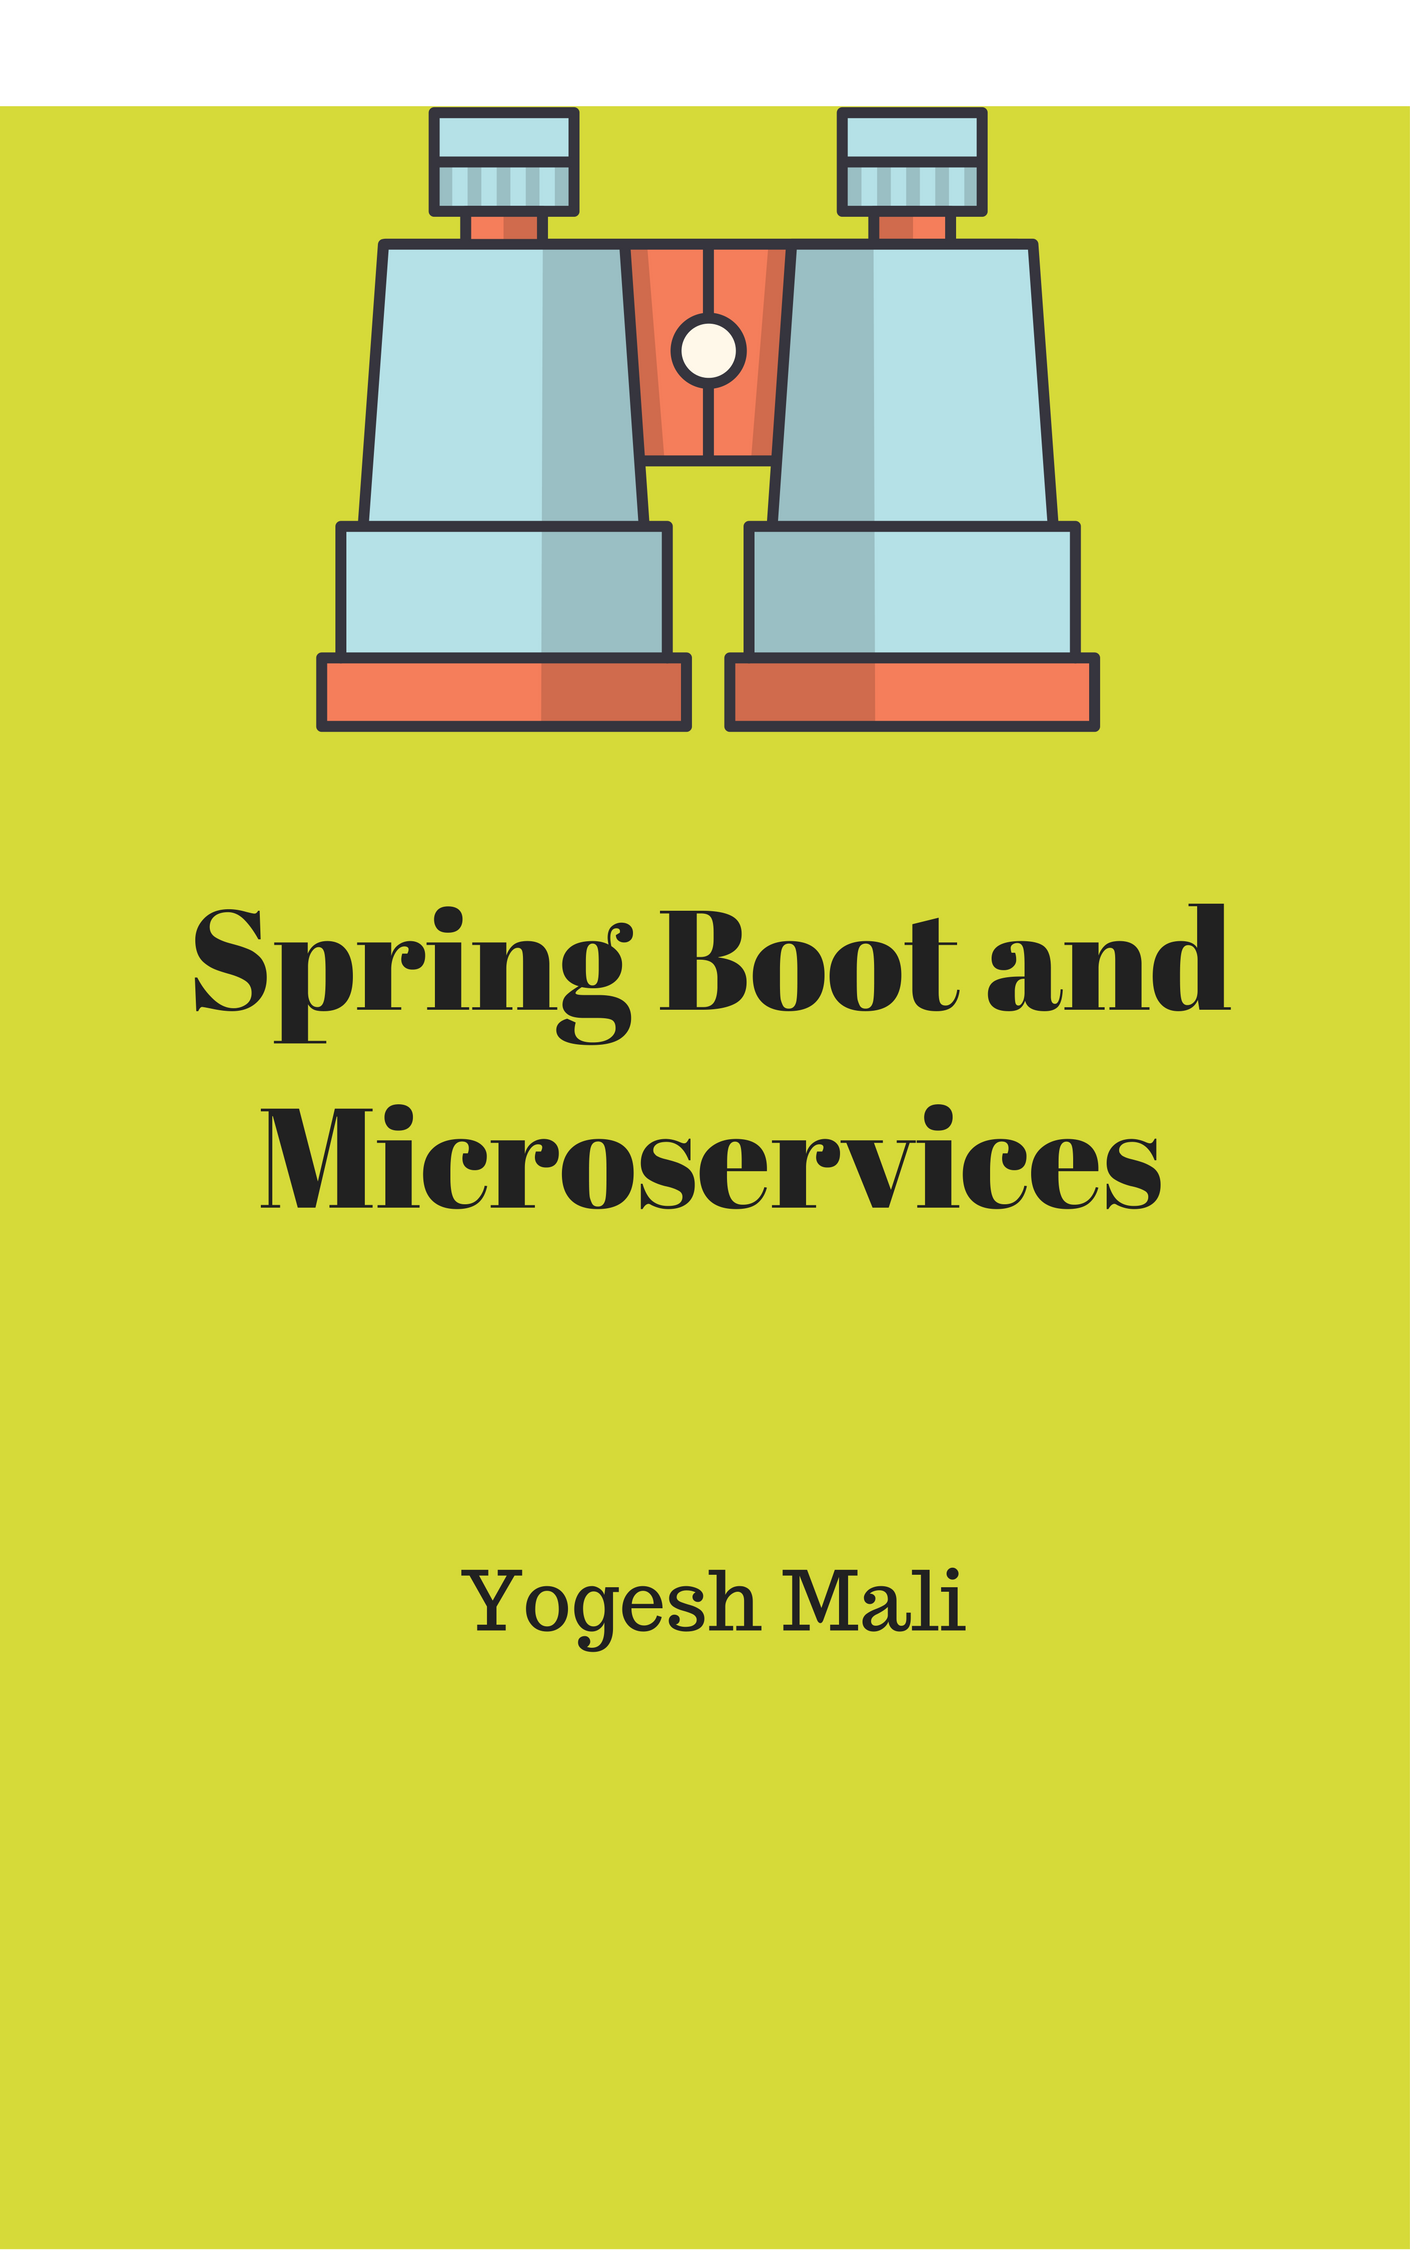 Spring Boot and Microservices